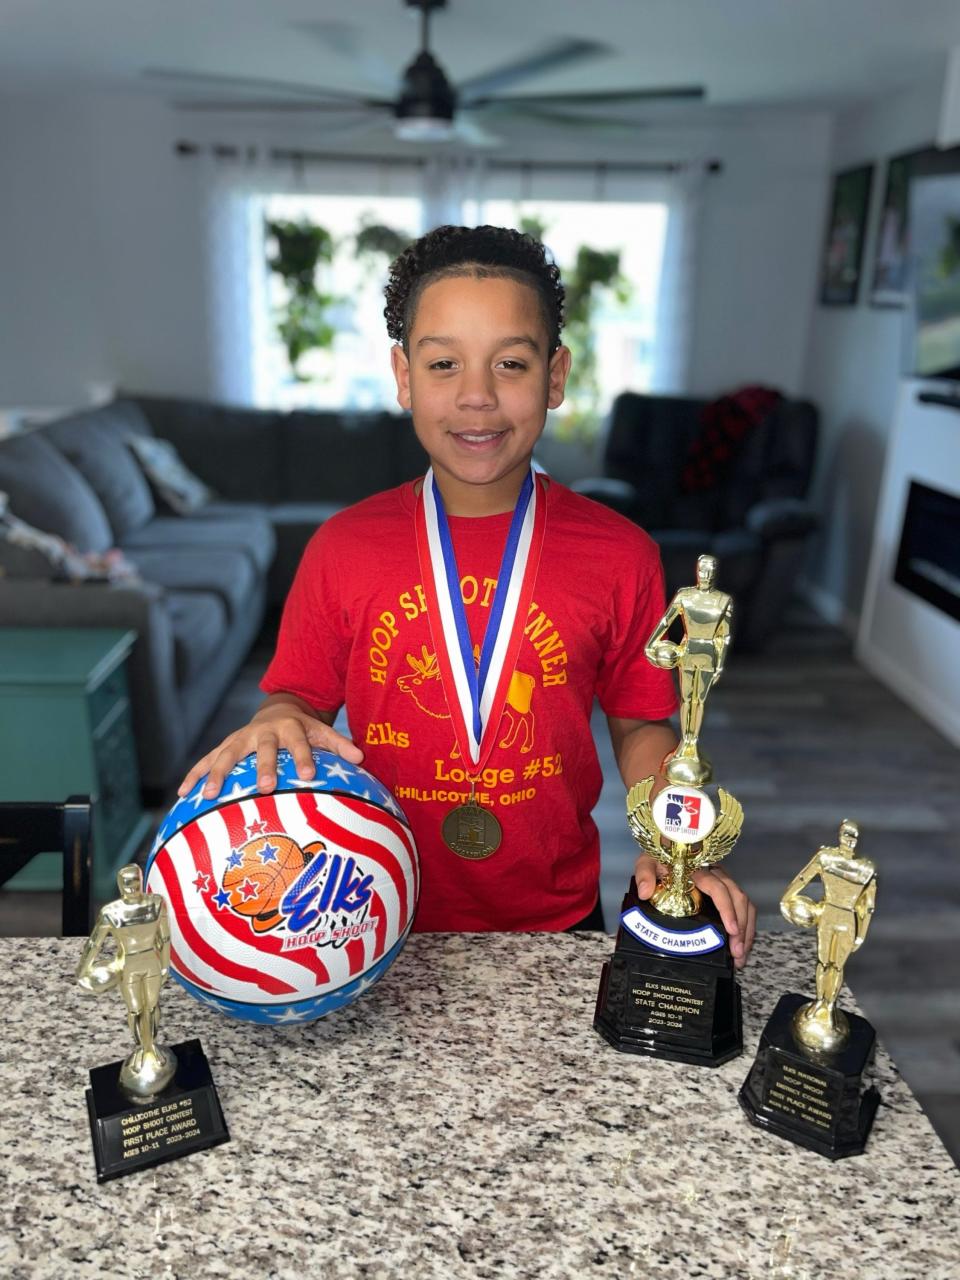 Unioto student, Isaiah Reveal, has been working his way up the ranks in the Elks Hoop Shoot Competition and will soon be representing the state of Ohio in the regional competition.